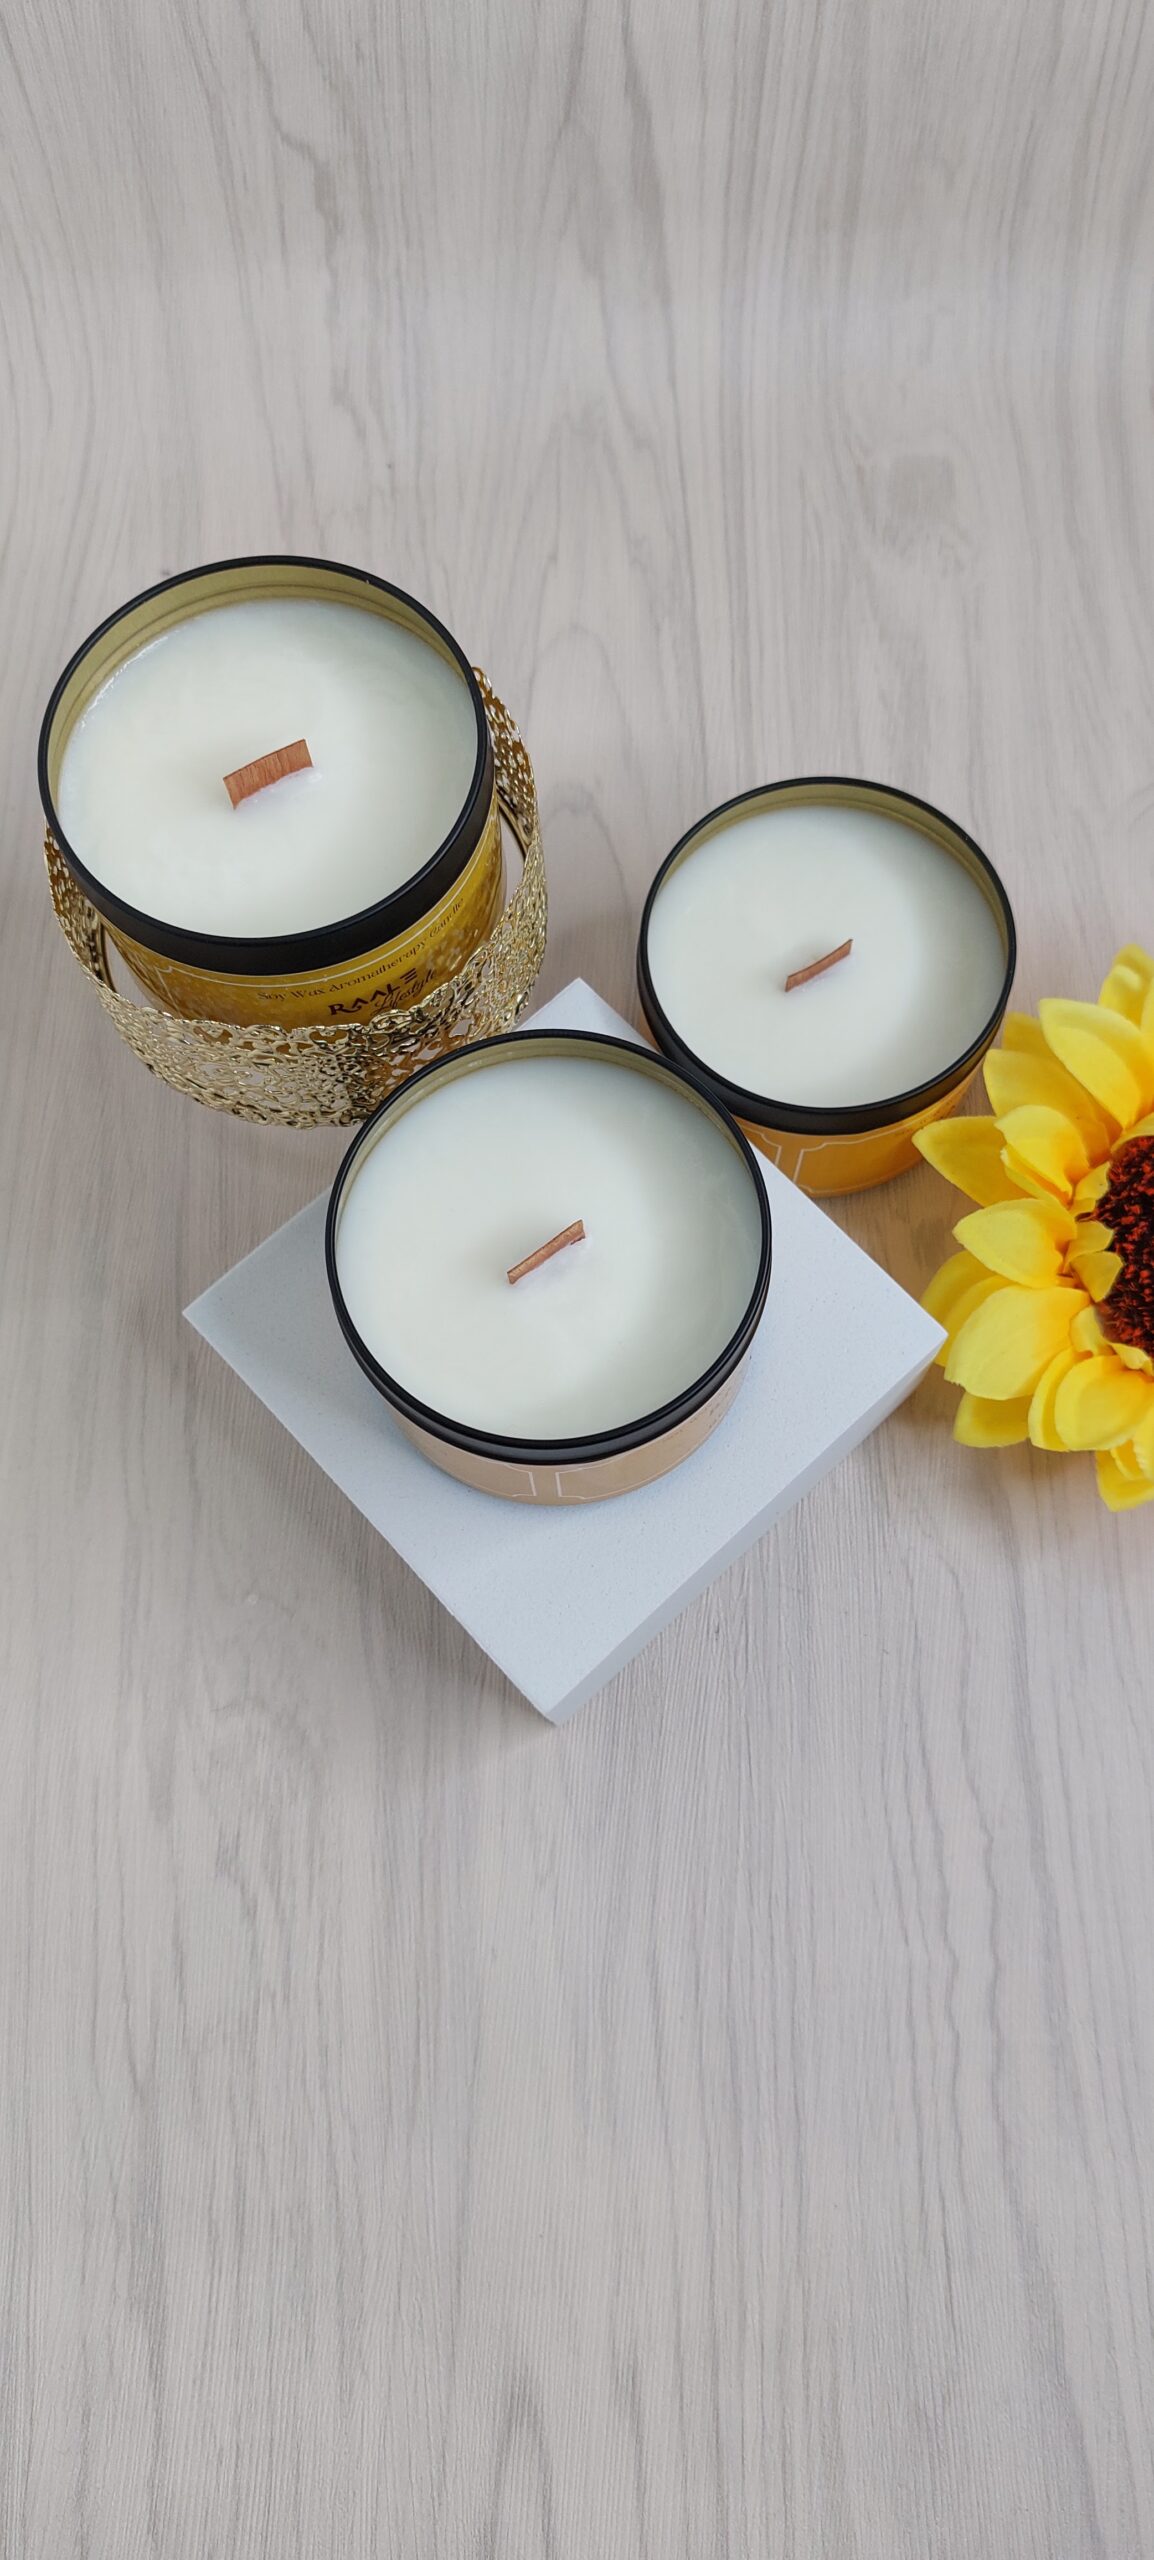 Raale Lifestyle Candles sold on bellafricana marketplace scented candles